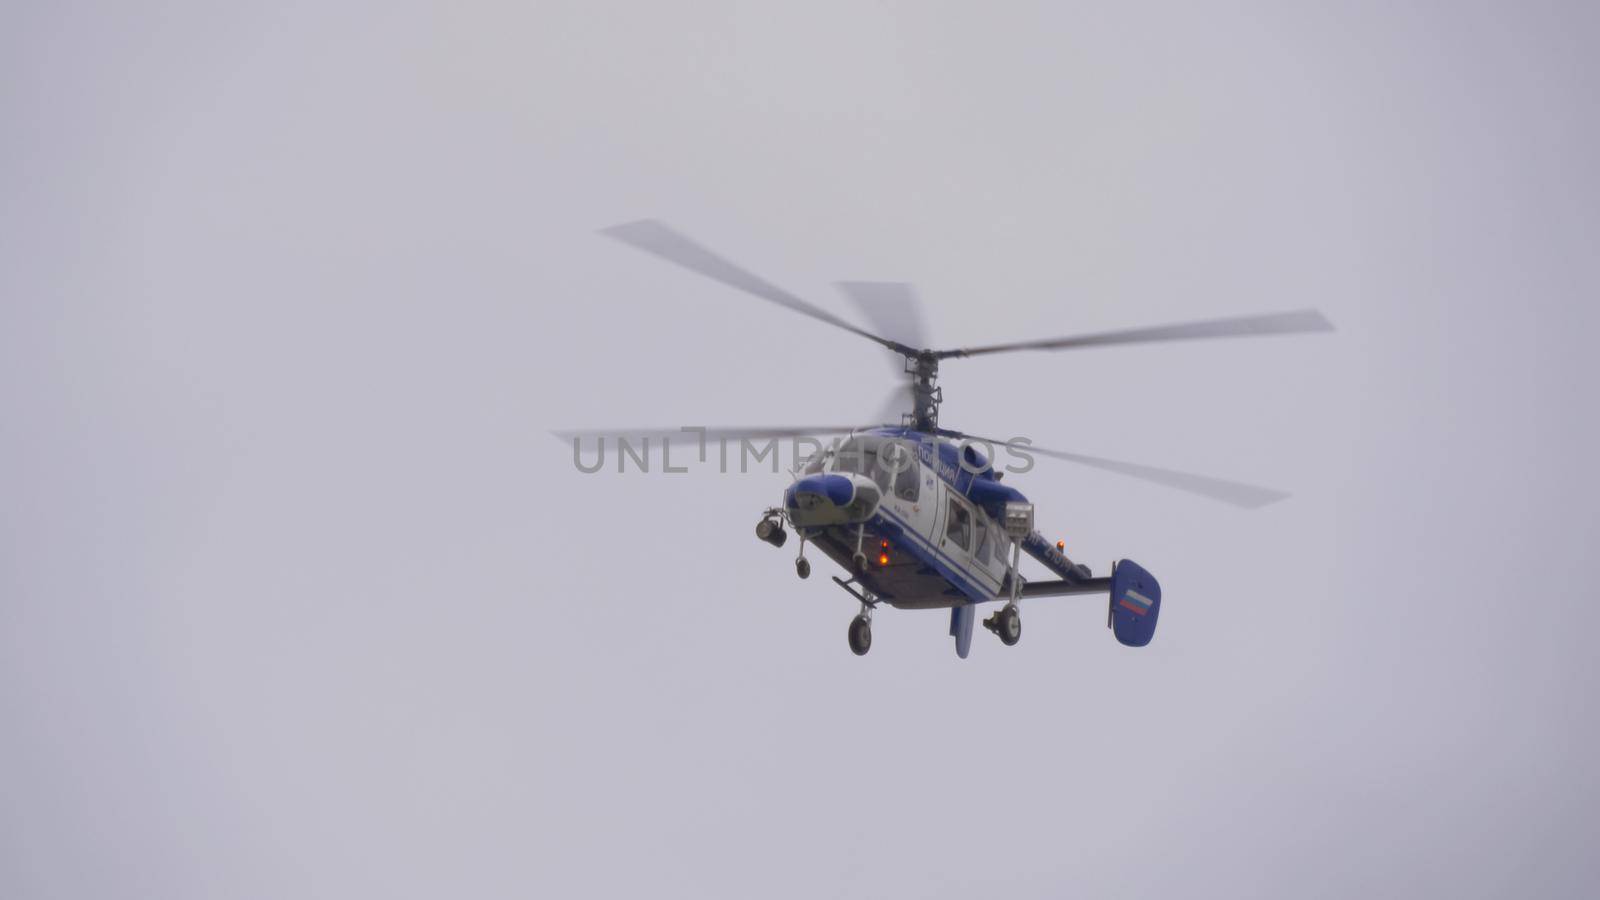 Police hellicopter flying in Russia sky by Studia72